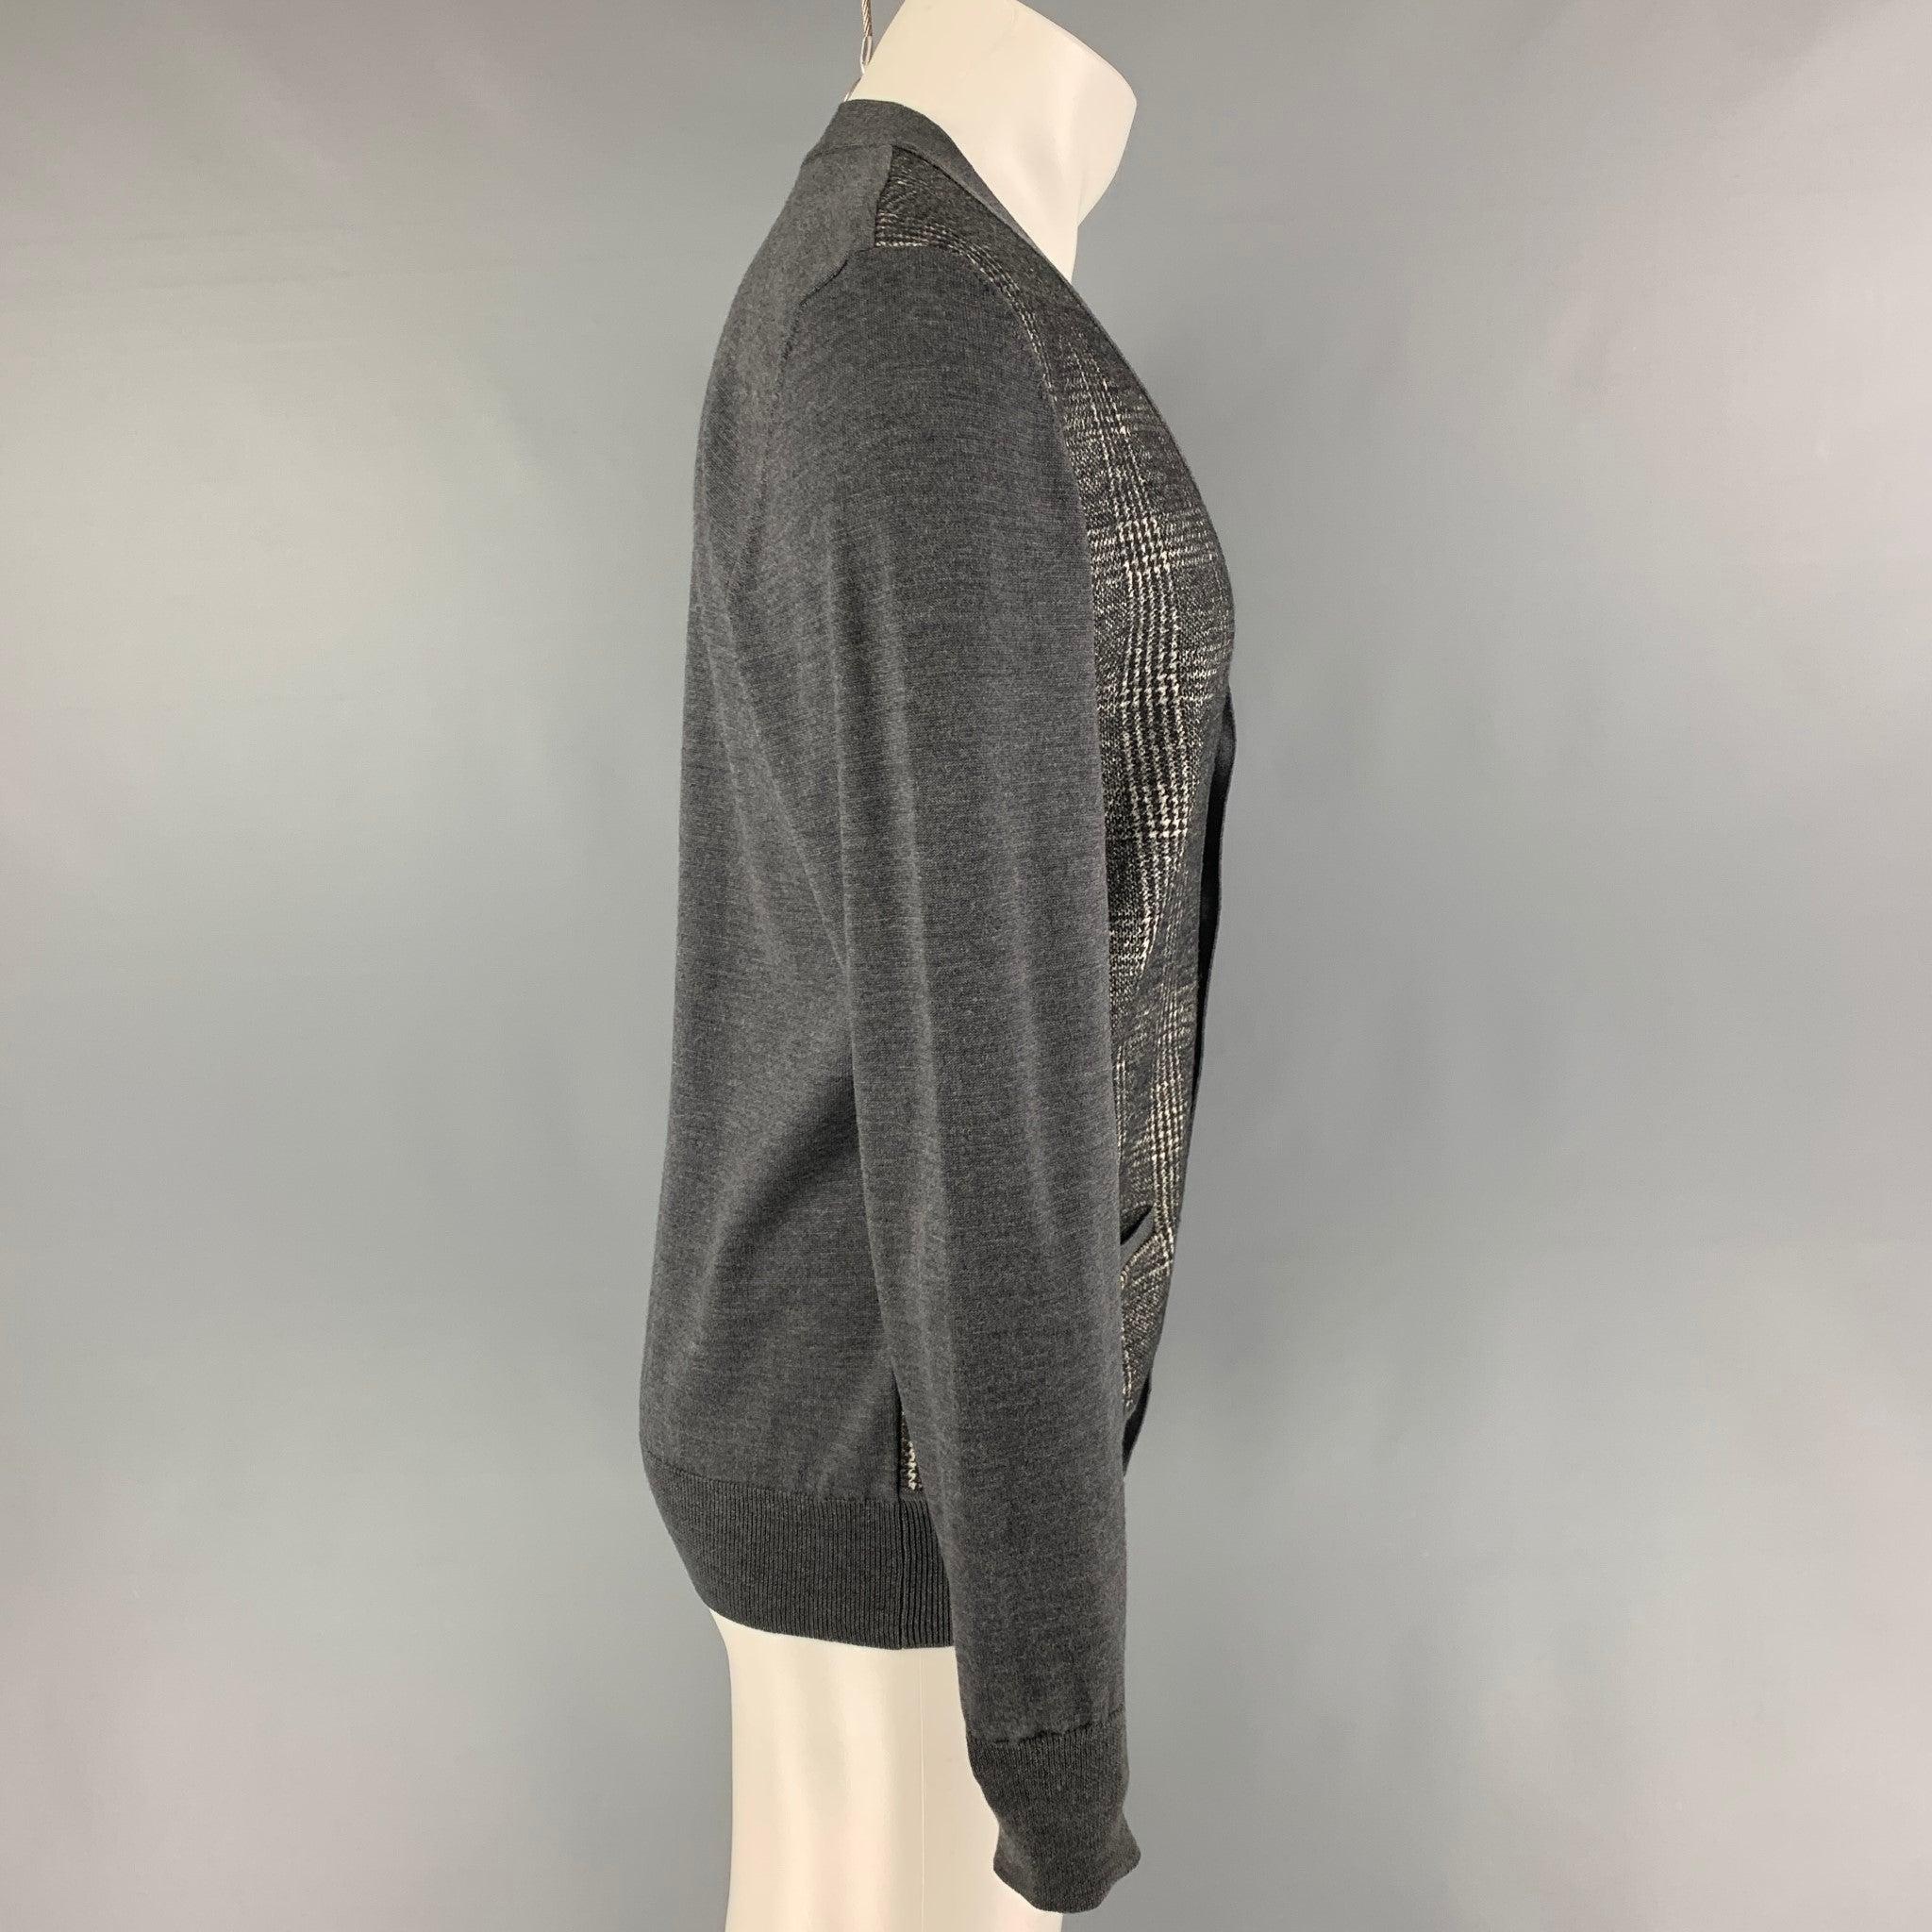 VIKTOR & ROLF cardigan comes in a grey & cream mixed print wool featuring front pockets and a buttoned closure. Made in Italy.
Very Good
Pre-Owned Condition. 

Marked:   M  

Measurements: 
 
Shoulder: 18 inches  Chest: 41 inches  Sleeve: 27 inches 